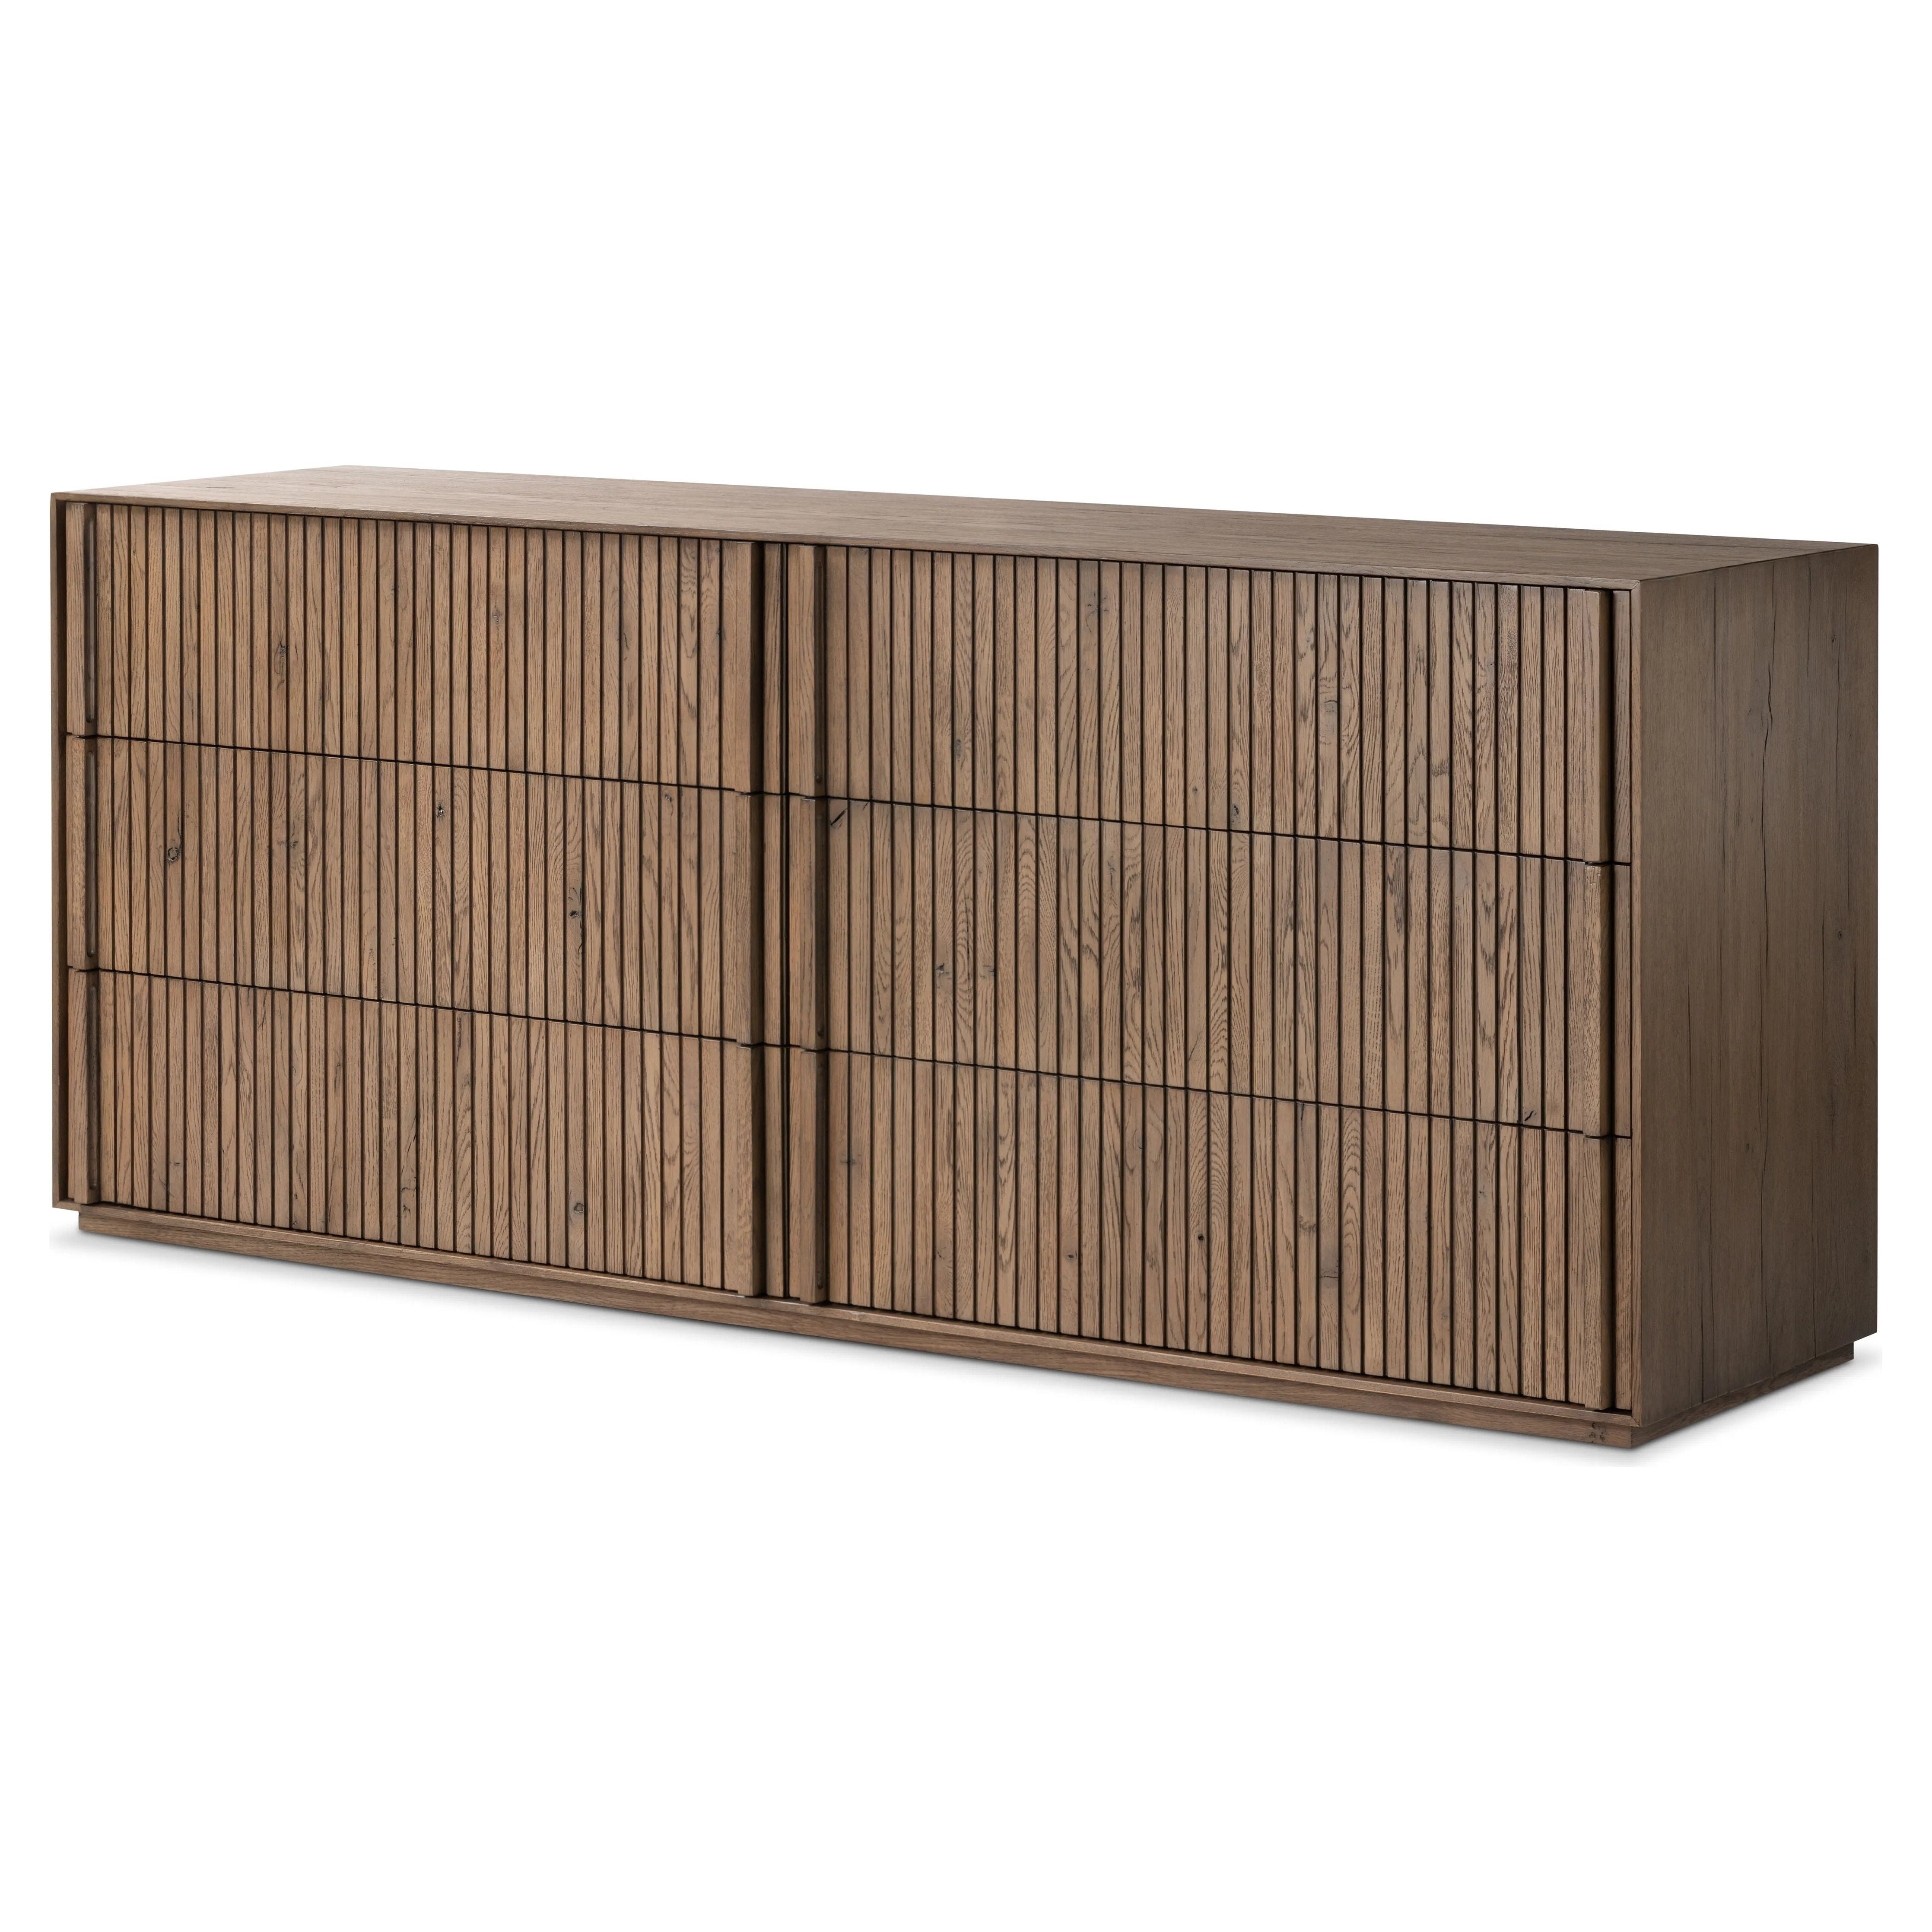 Designed by Thomas Bina and Ronald Sasson, a design partnership blending both modern minimalist and Brazilian influences. Crafted from solid oak, this clean-lined dresser features vertical reed detailing on the drawer fronts with wooden pull detailing on the outer edges. Drawers are finished with soft close under-mount drawer glides.Collection: Bin Amethyst Home provides interior design, new home construction design consulting, vintage area rugs, and lighting in the Alpharetta metro area.